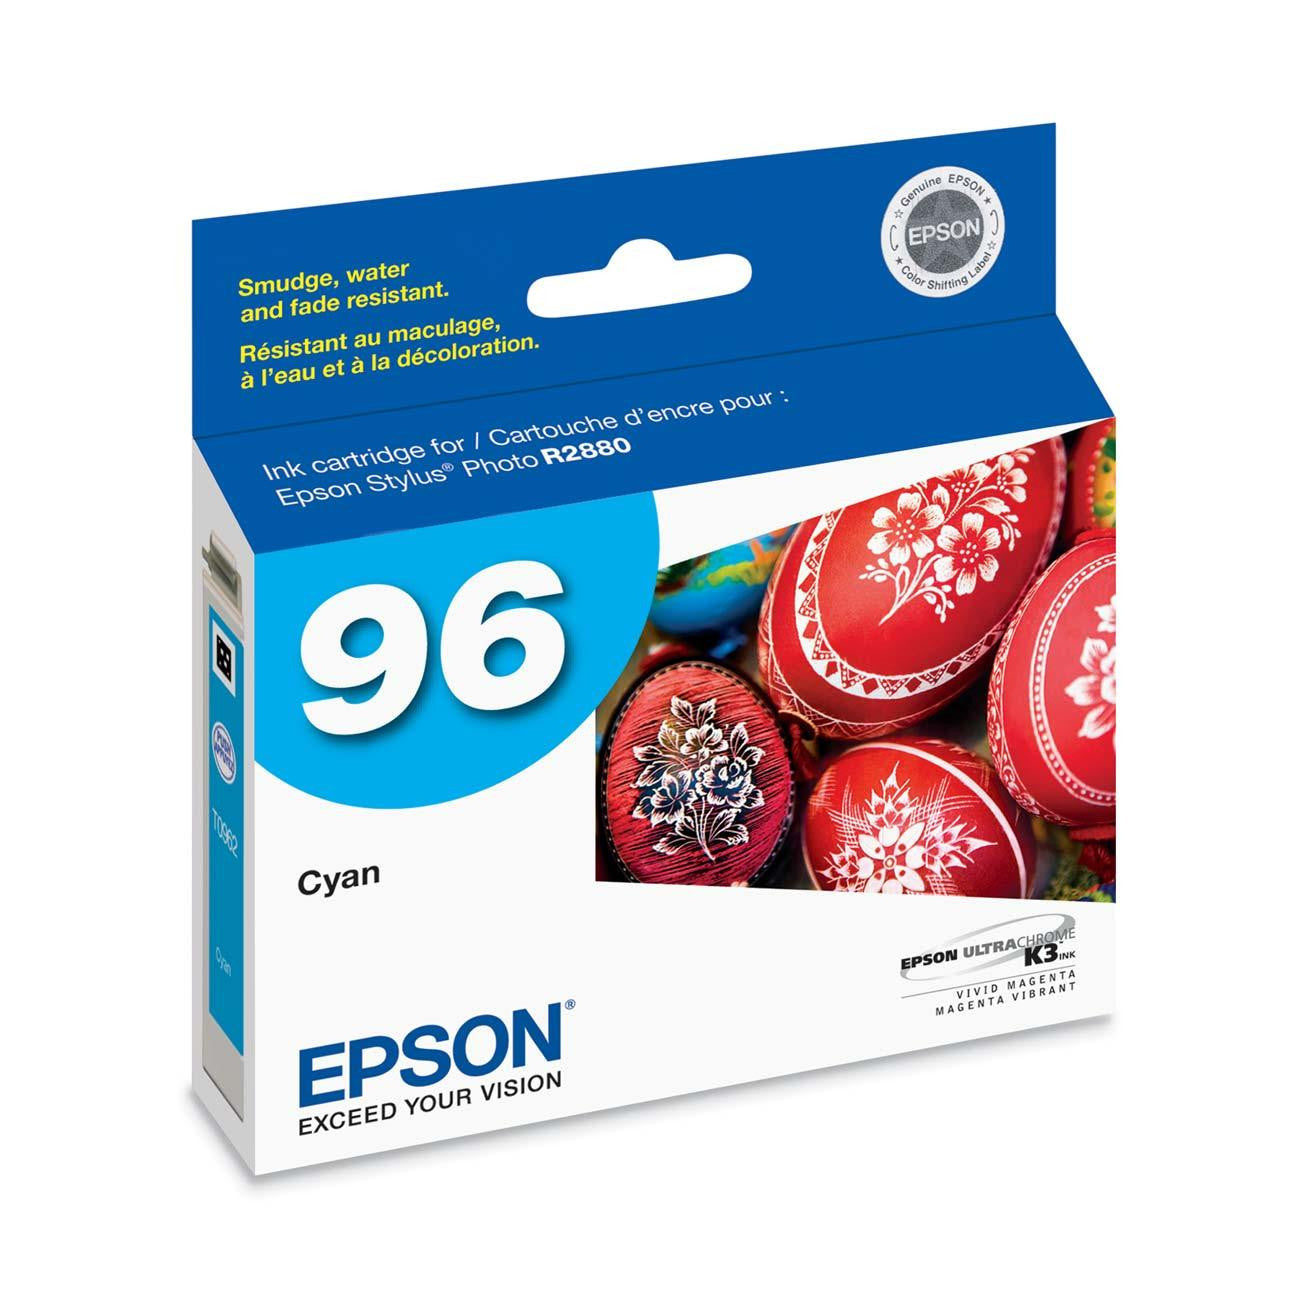 Epson T096220 R2880 Cyan Ink Cartridge (96), printers ink small format, Epson - Pictureline 